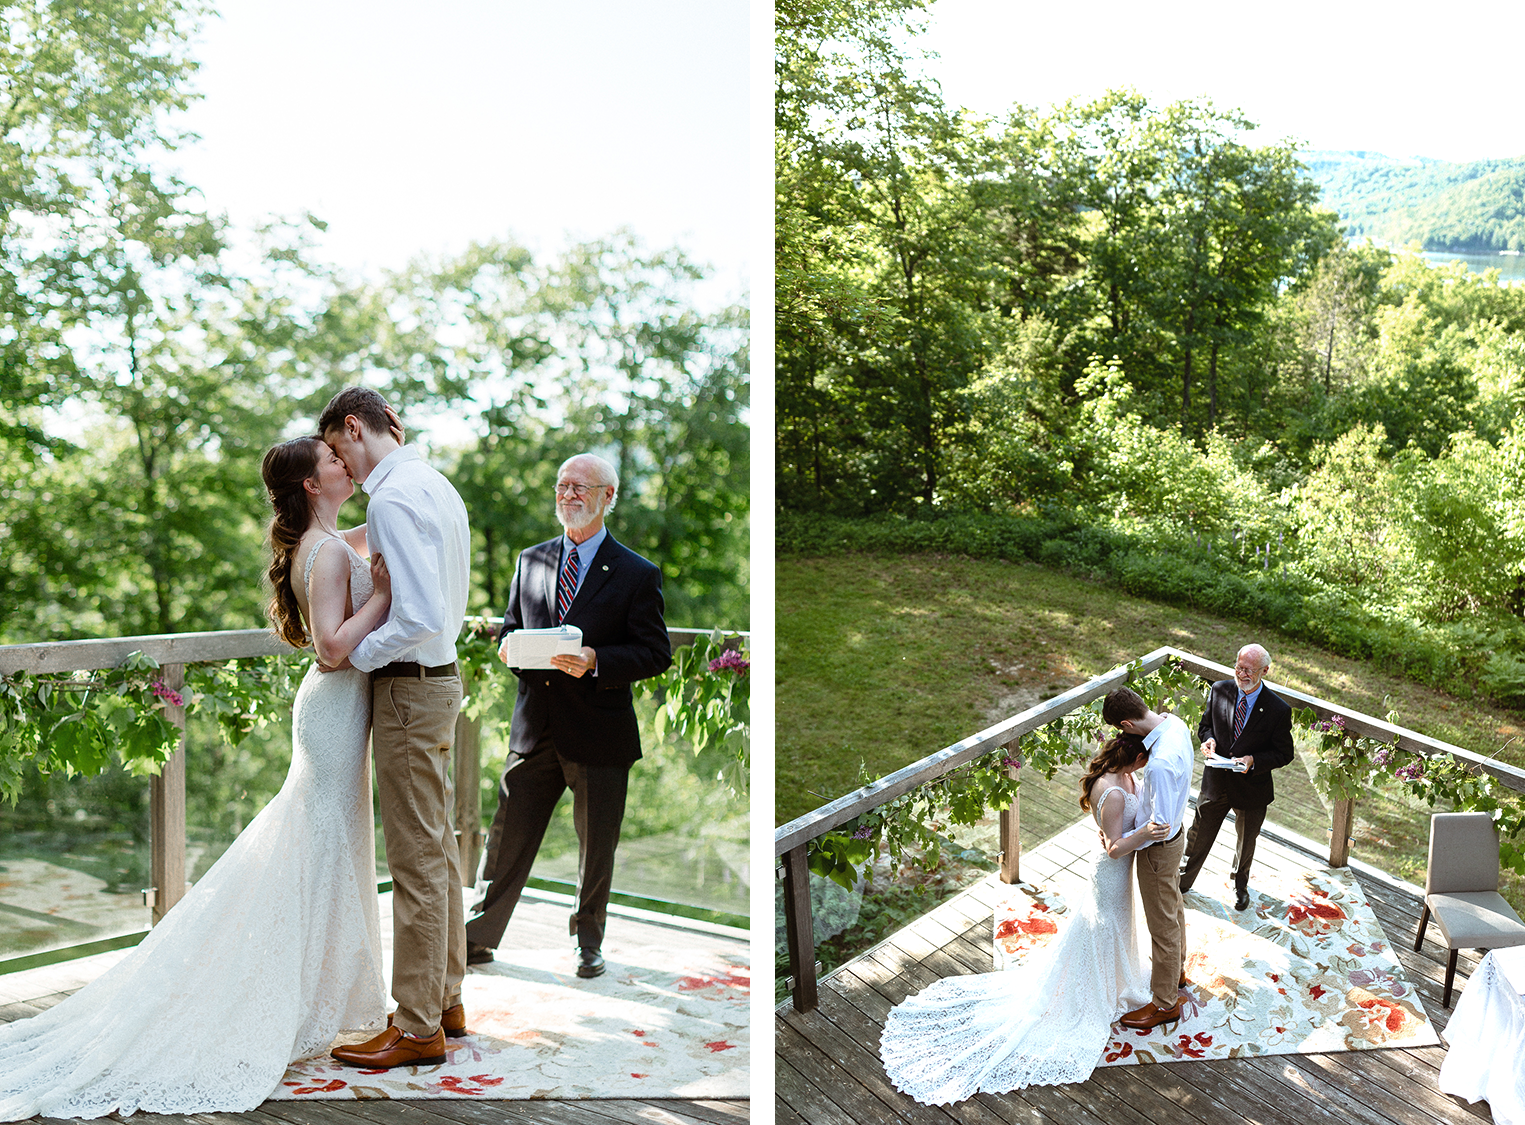 elopement-intimate-wedding-chelsea-quebec-airbnb-ideas-guides-toronto-elopement-photographer-55.PNG